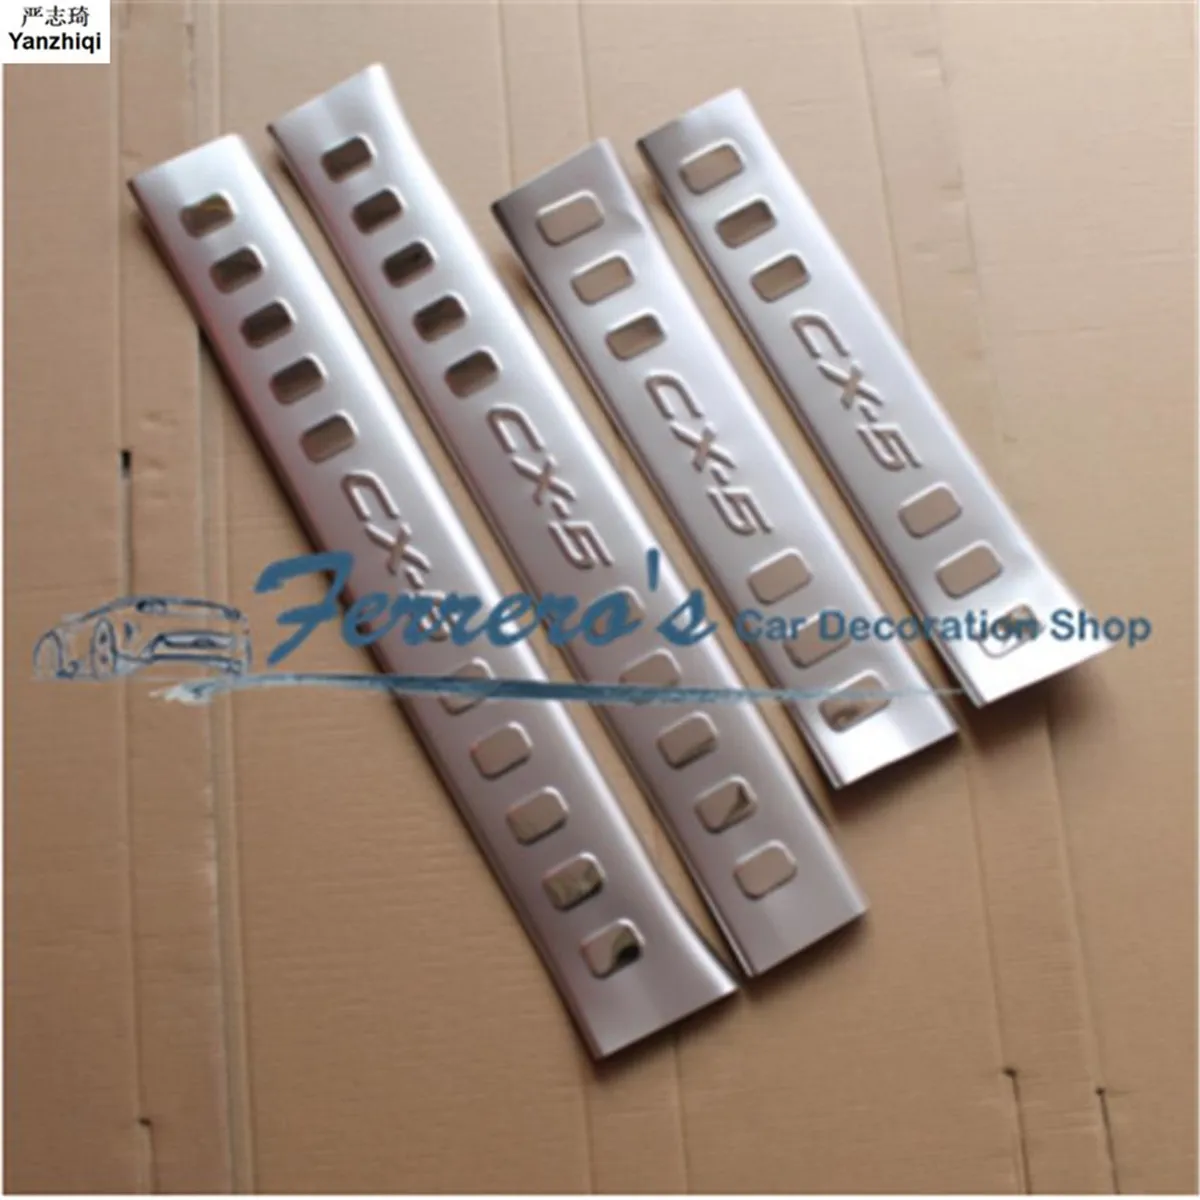 

Free shipping For Mazda CX-5 CX5 CX 5 stainless steel scuff plate inside door sill 4pcs/set high quality